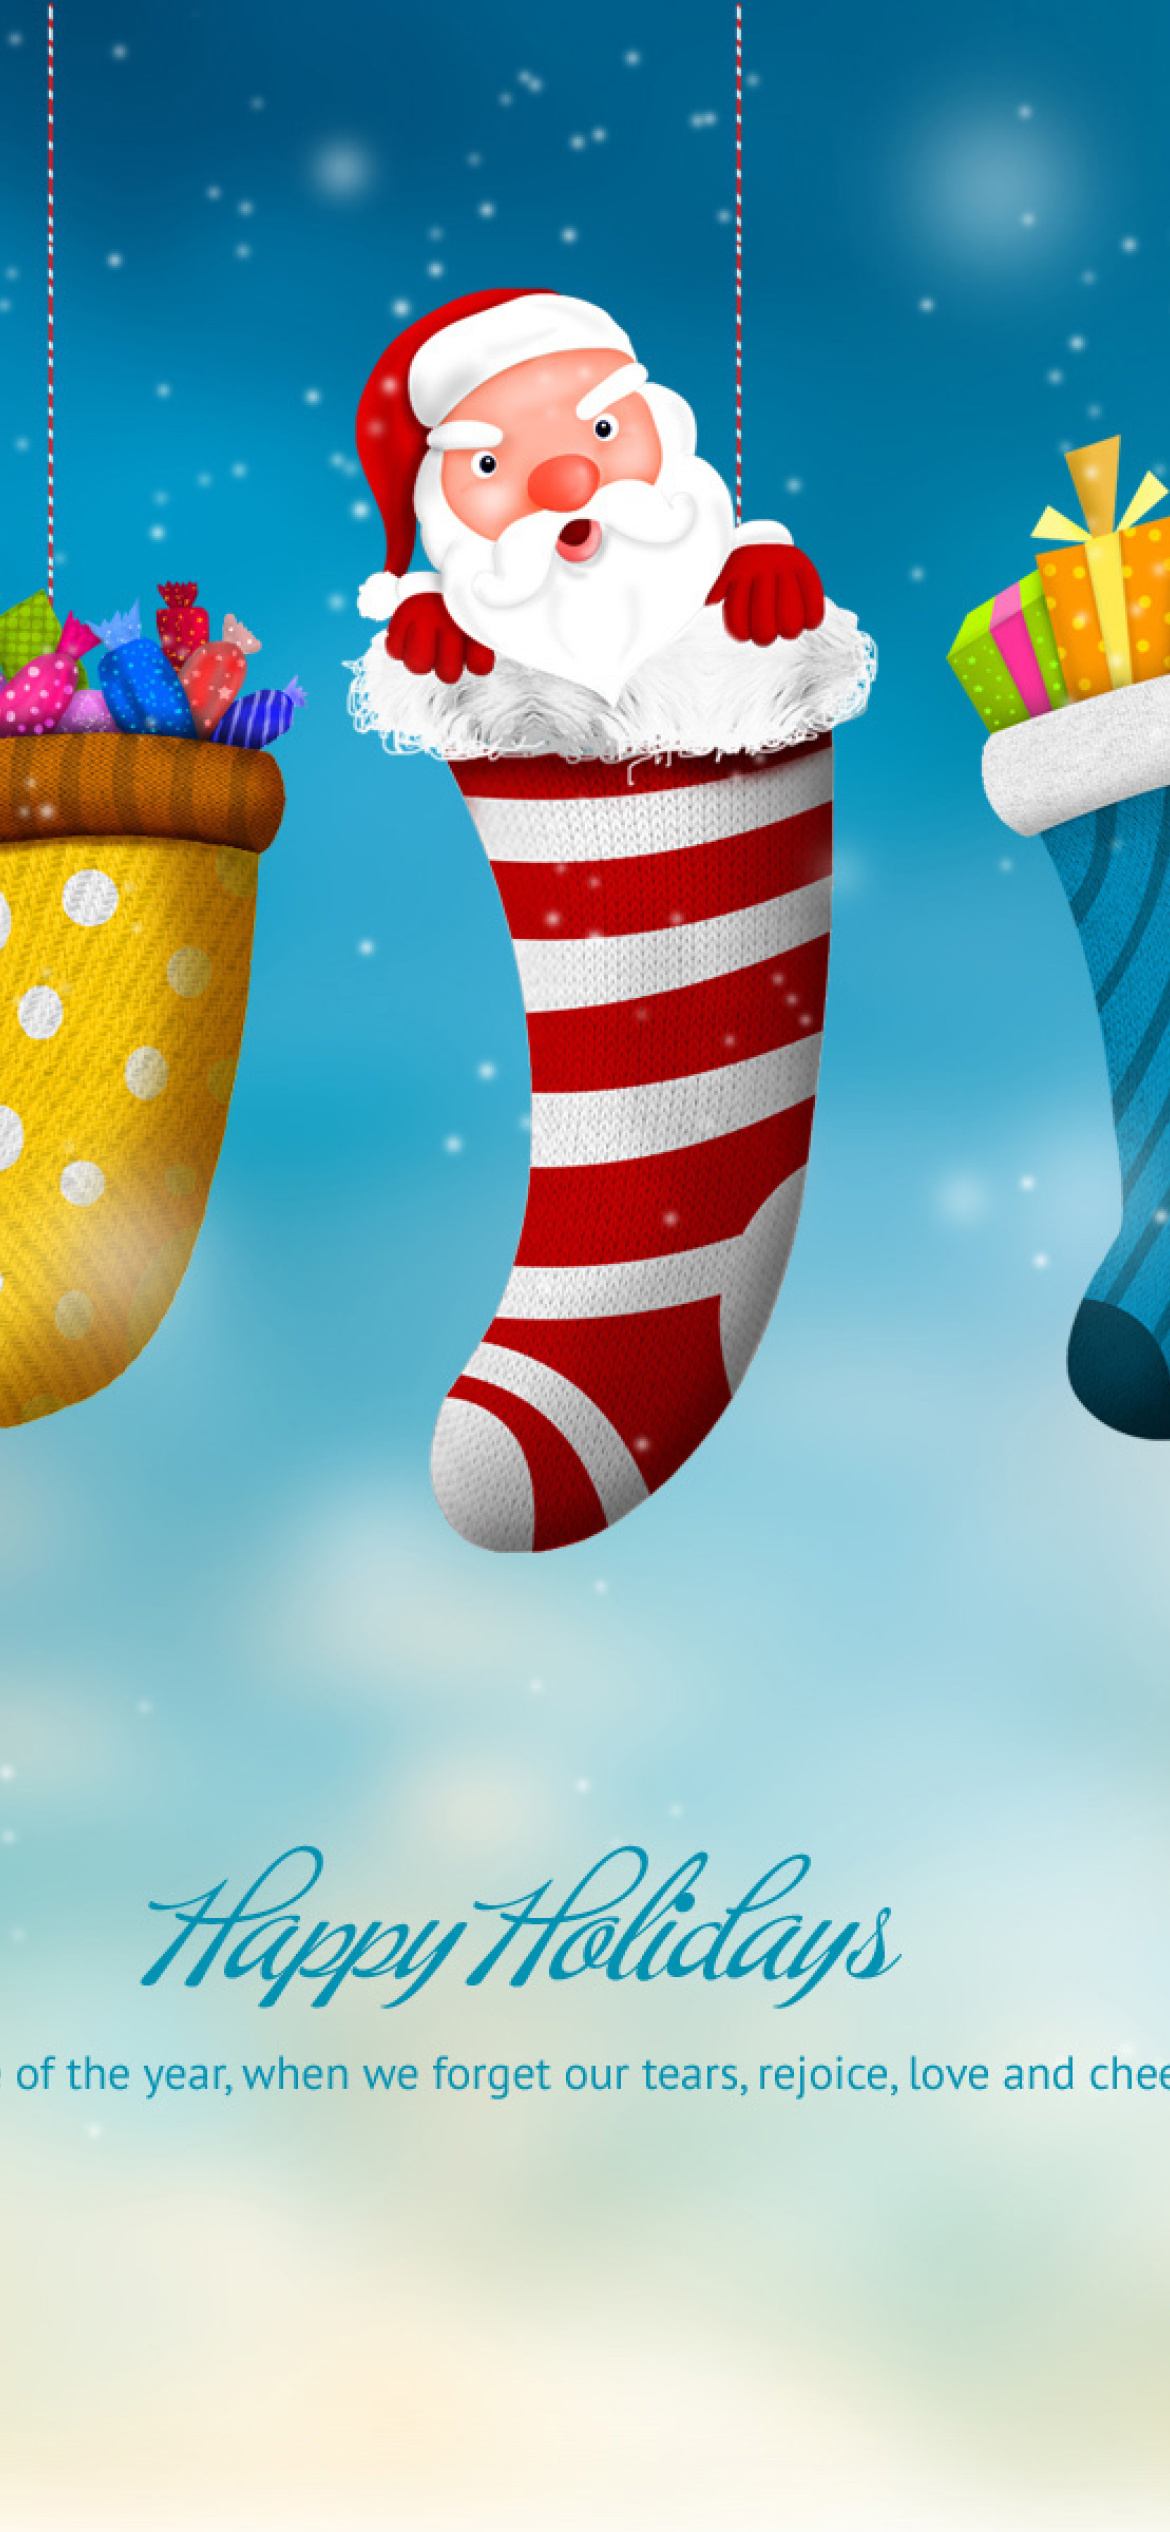 Merry Christmas and Happy New Year wallpaper 1170x2532